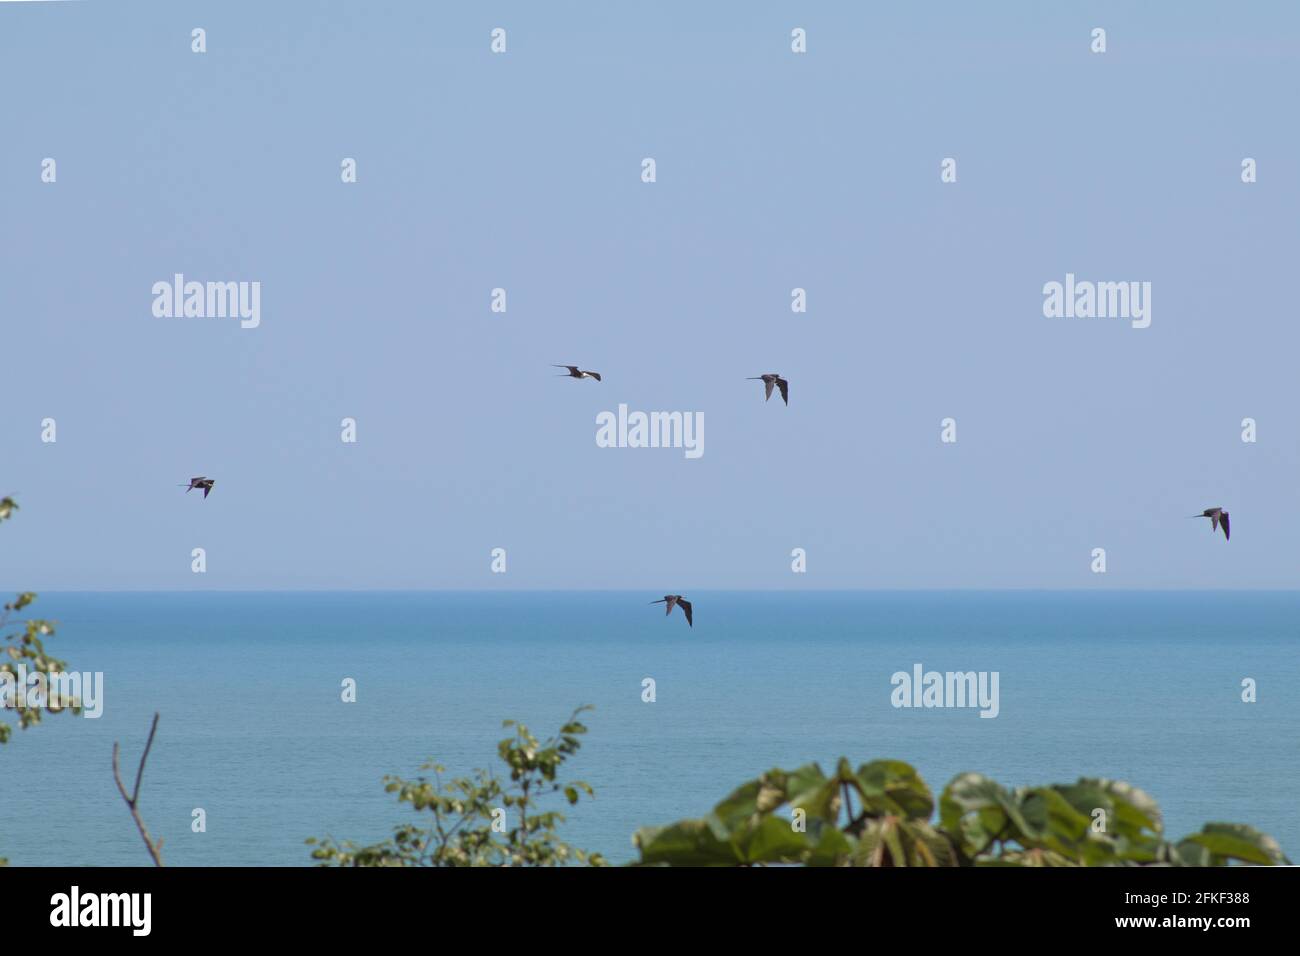 Flying birds over the emerald and blue sea Stock Photo